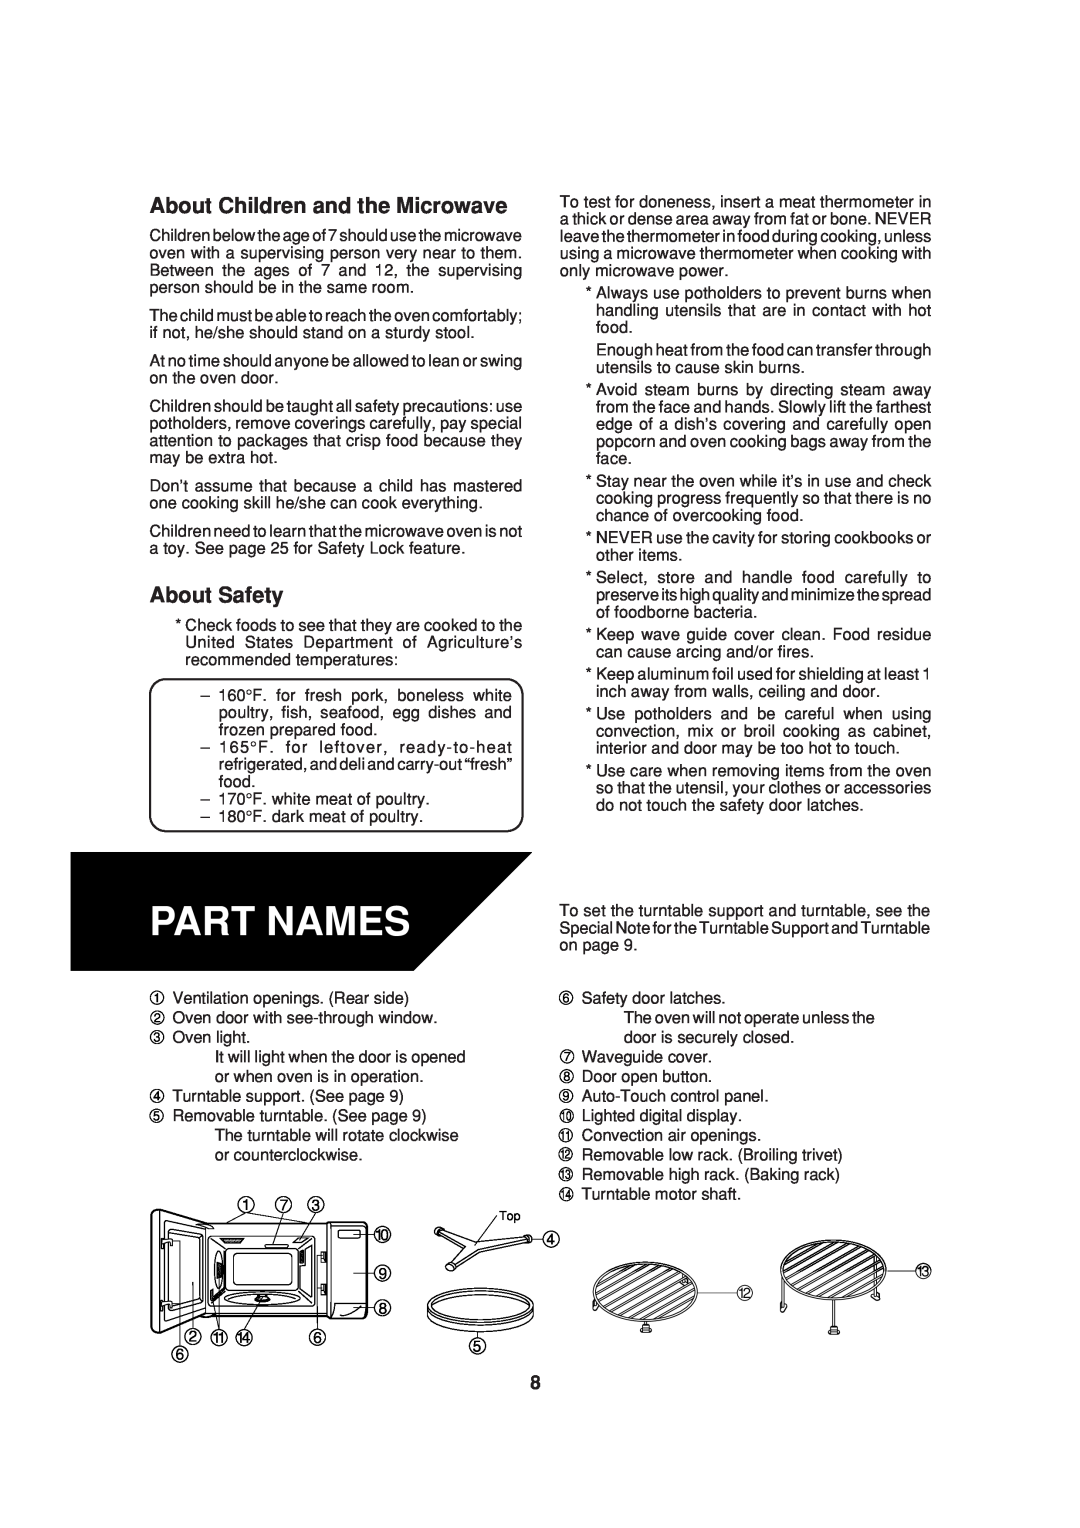 Sharp R-930AW, R-930AK, R-930CS operation manual Part Names, About Children and the Microwave, About Safety 